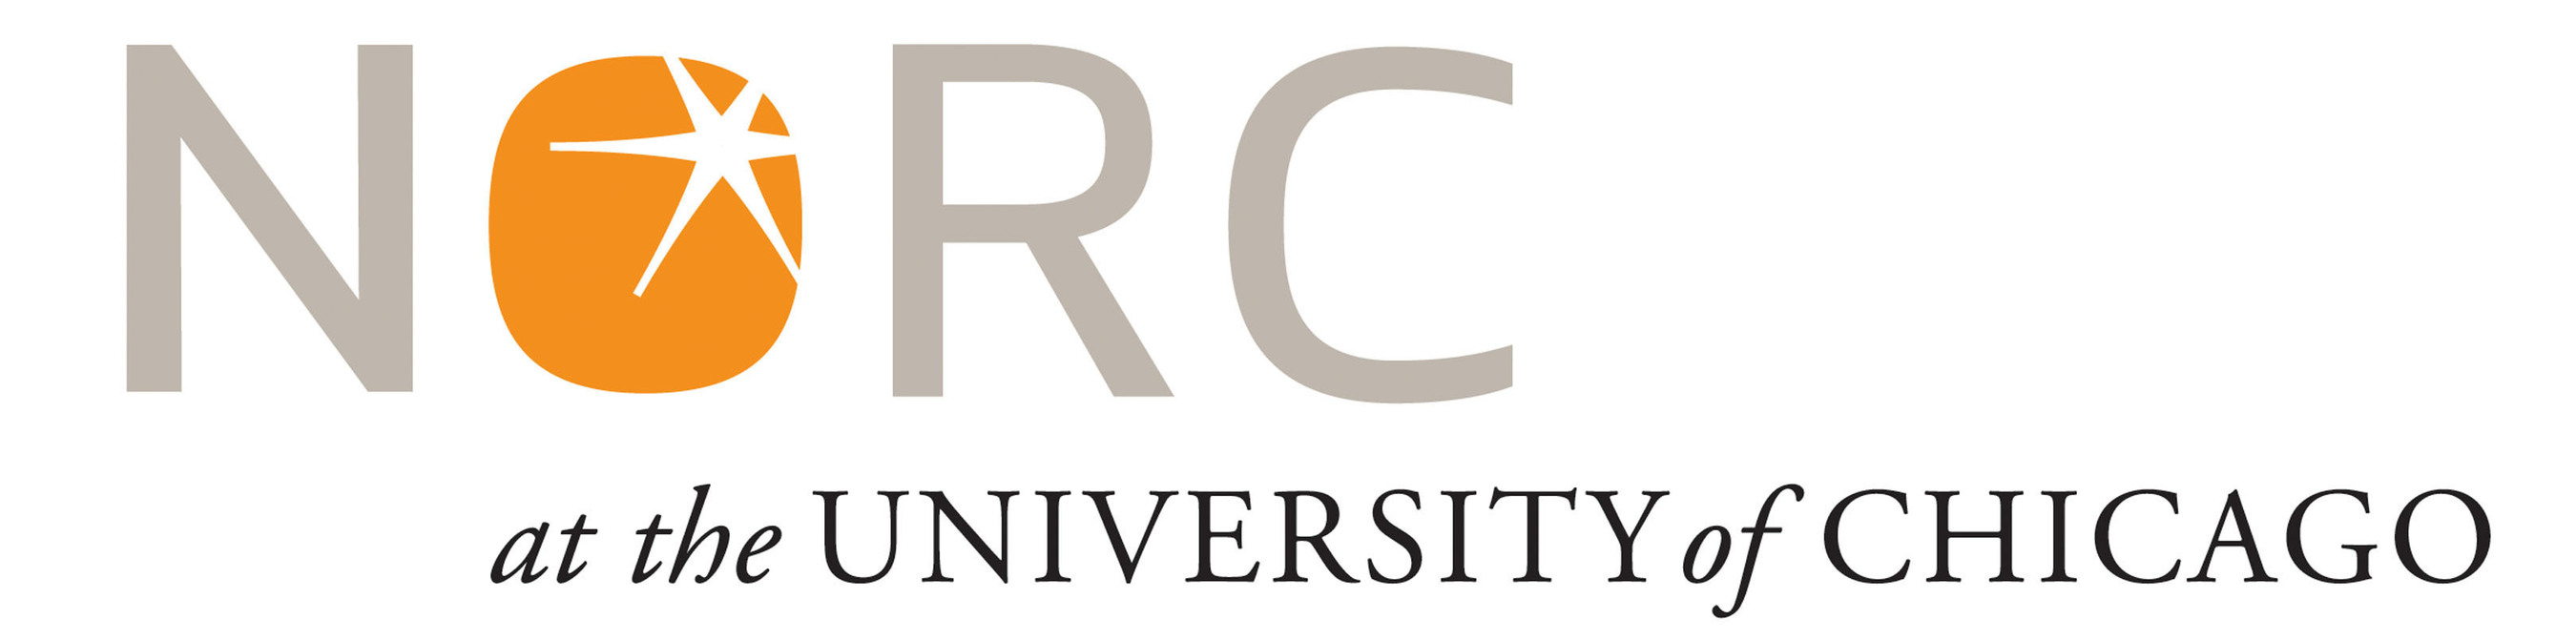 NORC at the University of Chicago logo. (PRNewsFoto/NORC at the University of Chicago)